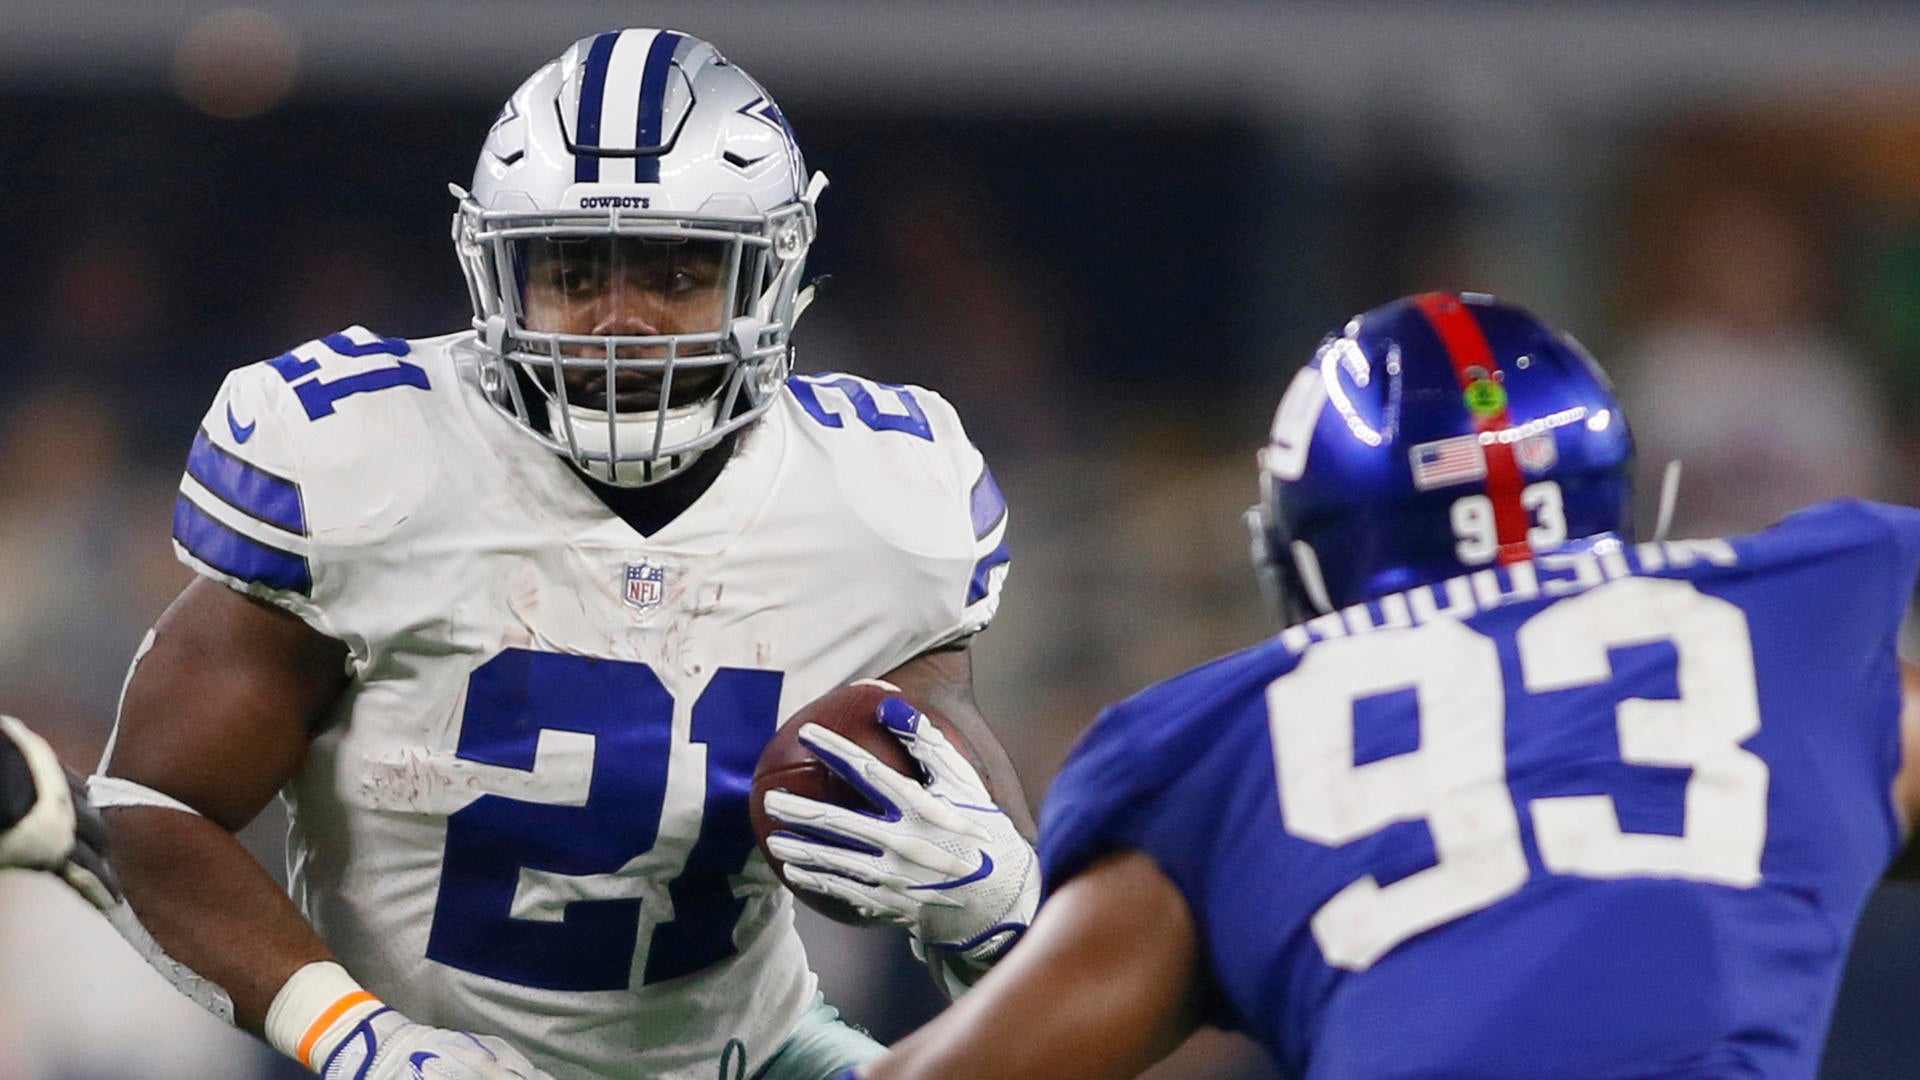 New York Giants 13-28 Dallas Cowboys, The Cowboys hold firm against a  decent Giants effort, summary: score, stats, highlights